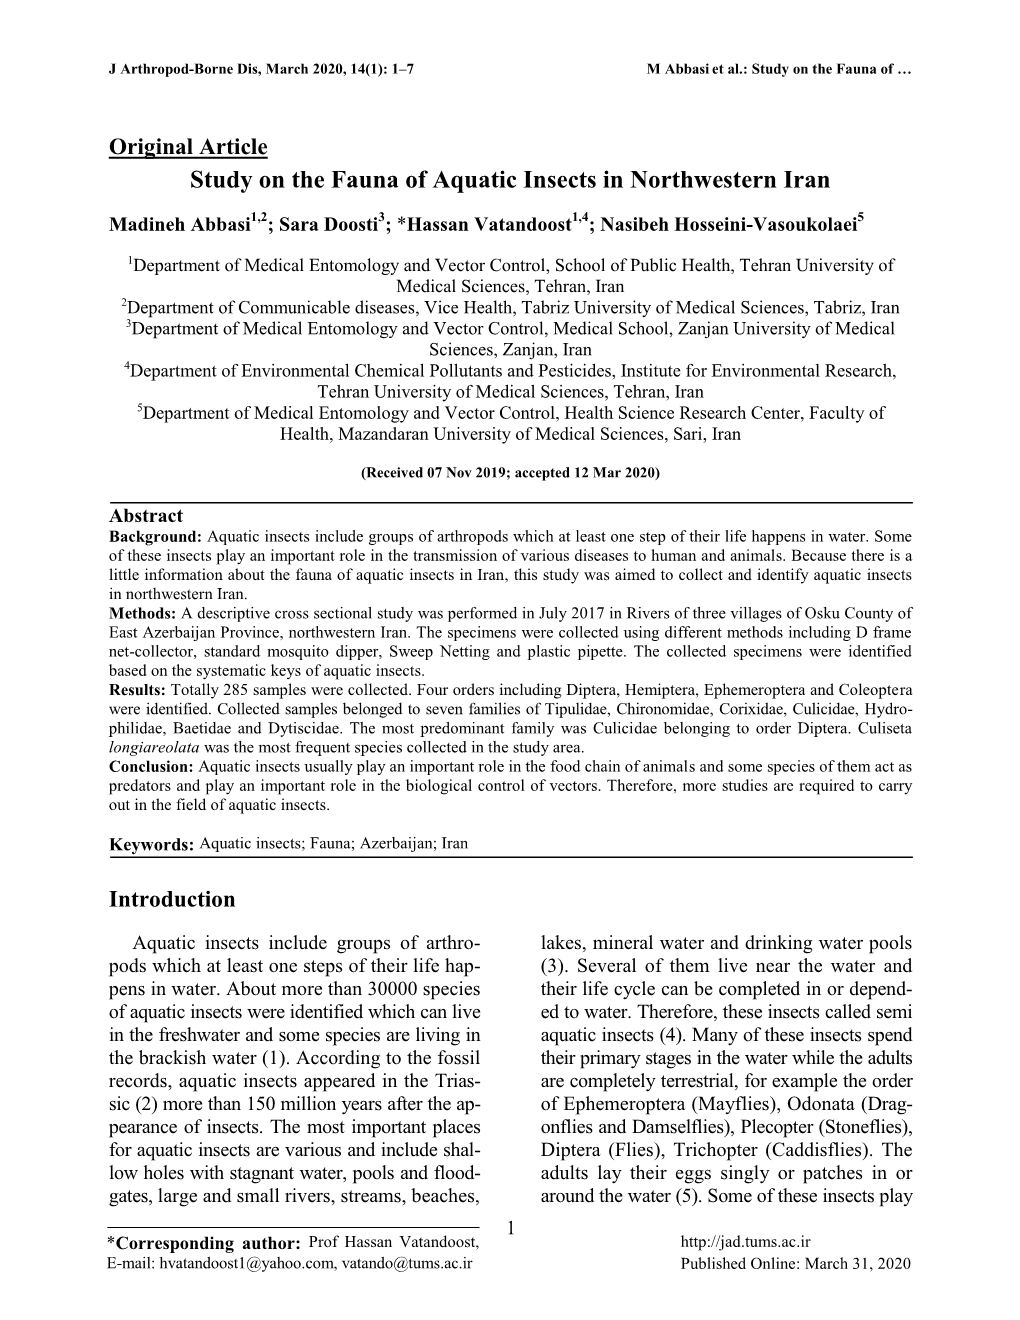 Study on the Fauna of Aquatic Insects in Northwestern Iran